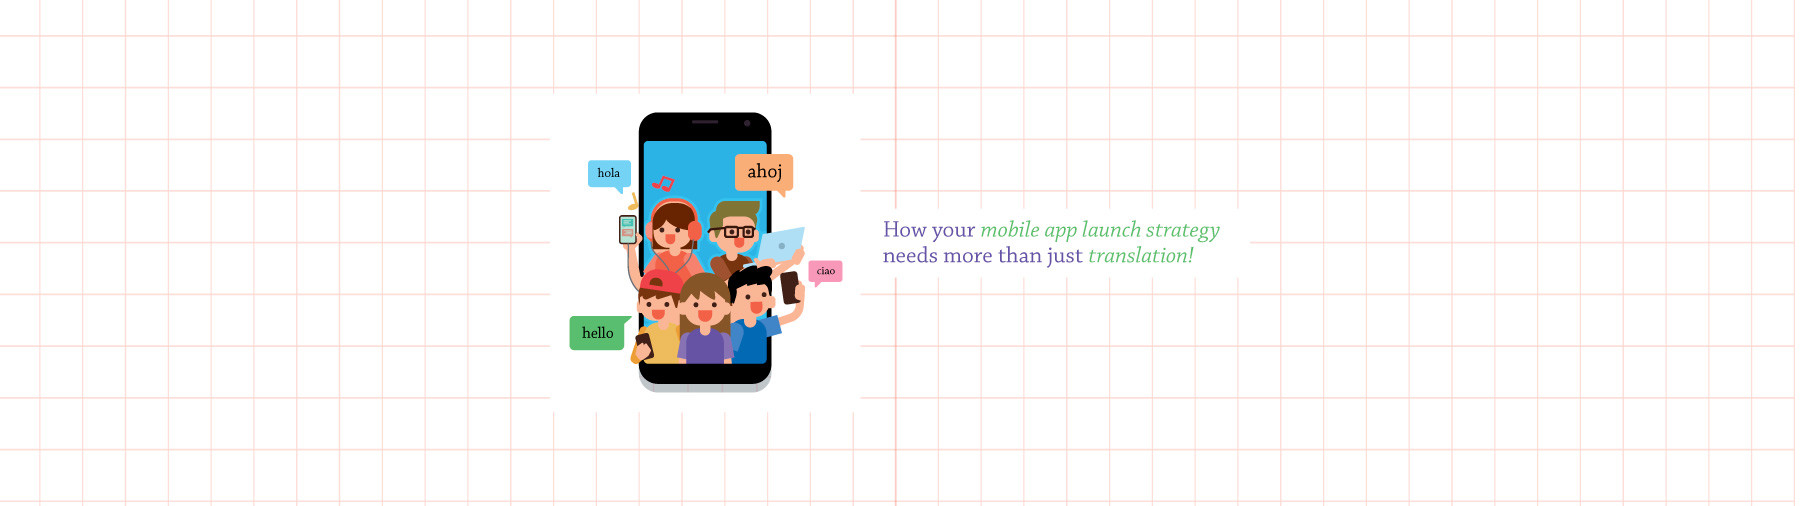 Mobile App Launch Strategy